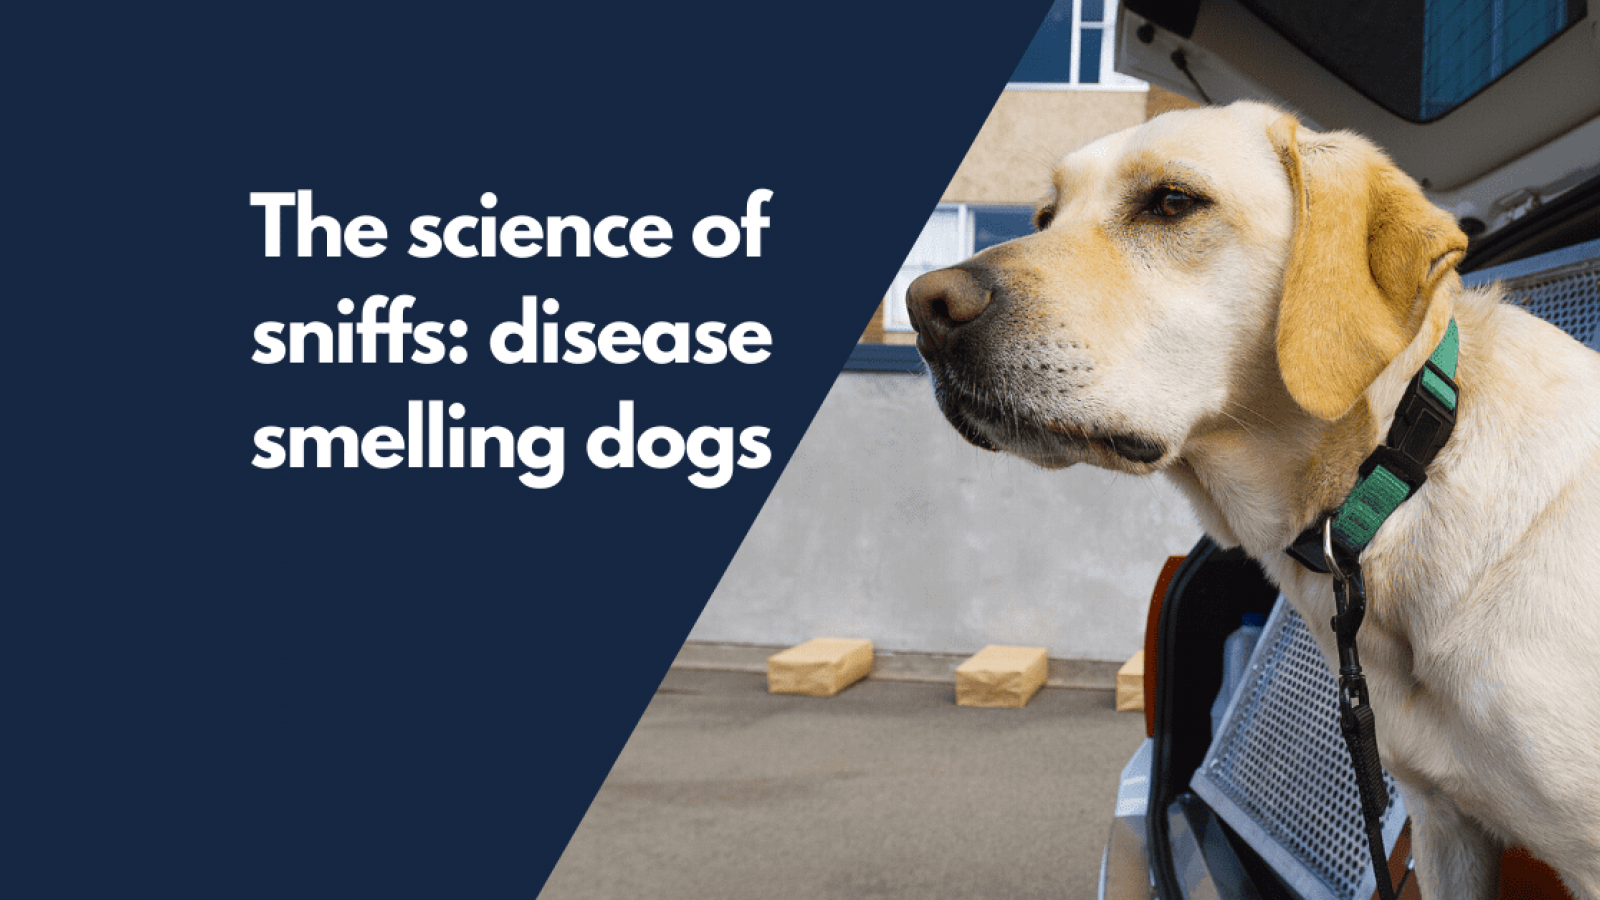 The science of sniffs: disease smelling dogs